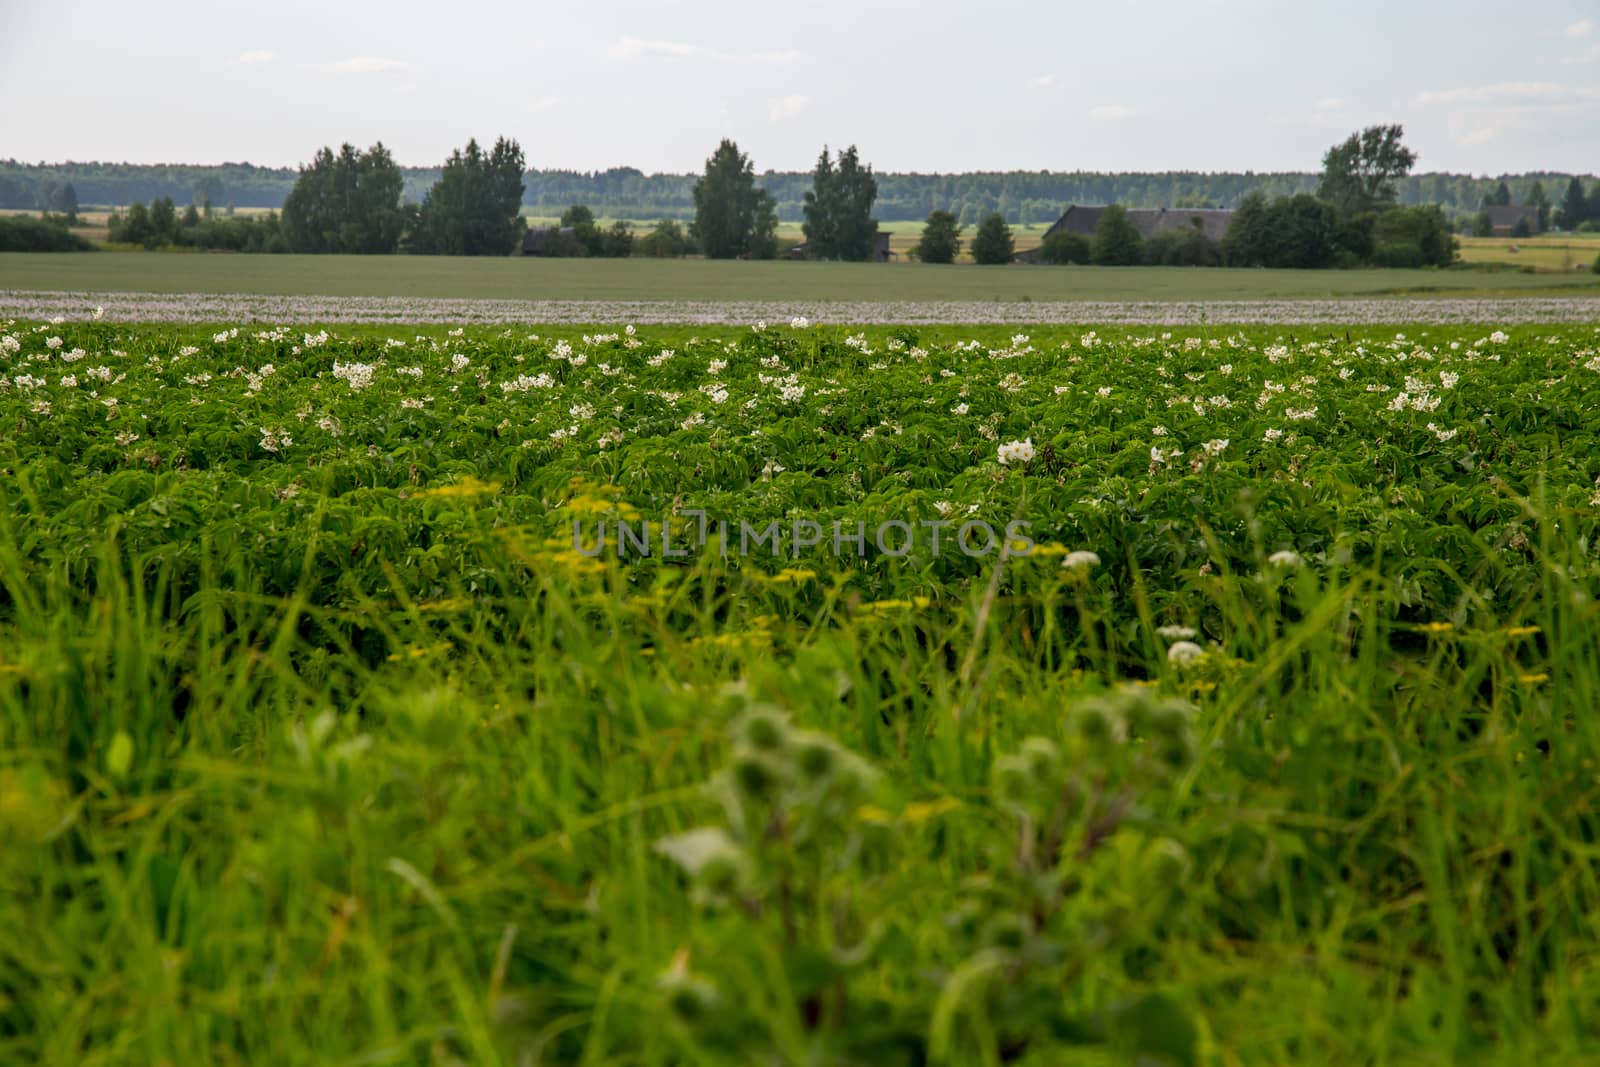 Potatoes plants with white flowers growing on farmers field. Landscape with flowering potatoes. Summer landscape with green field, wood and blue sky. Classic rural landscape in Latvia.